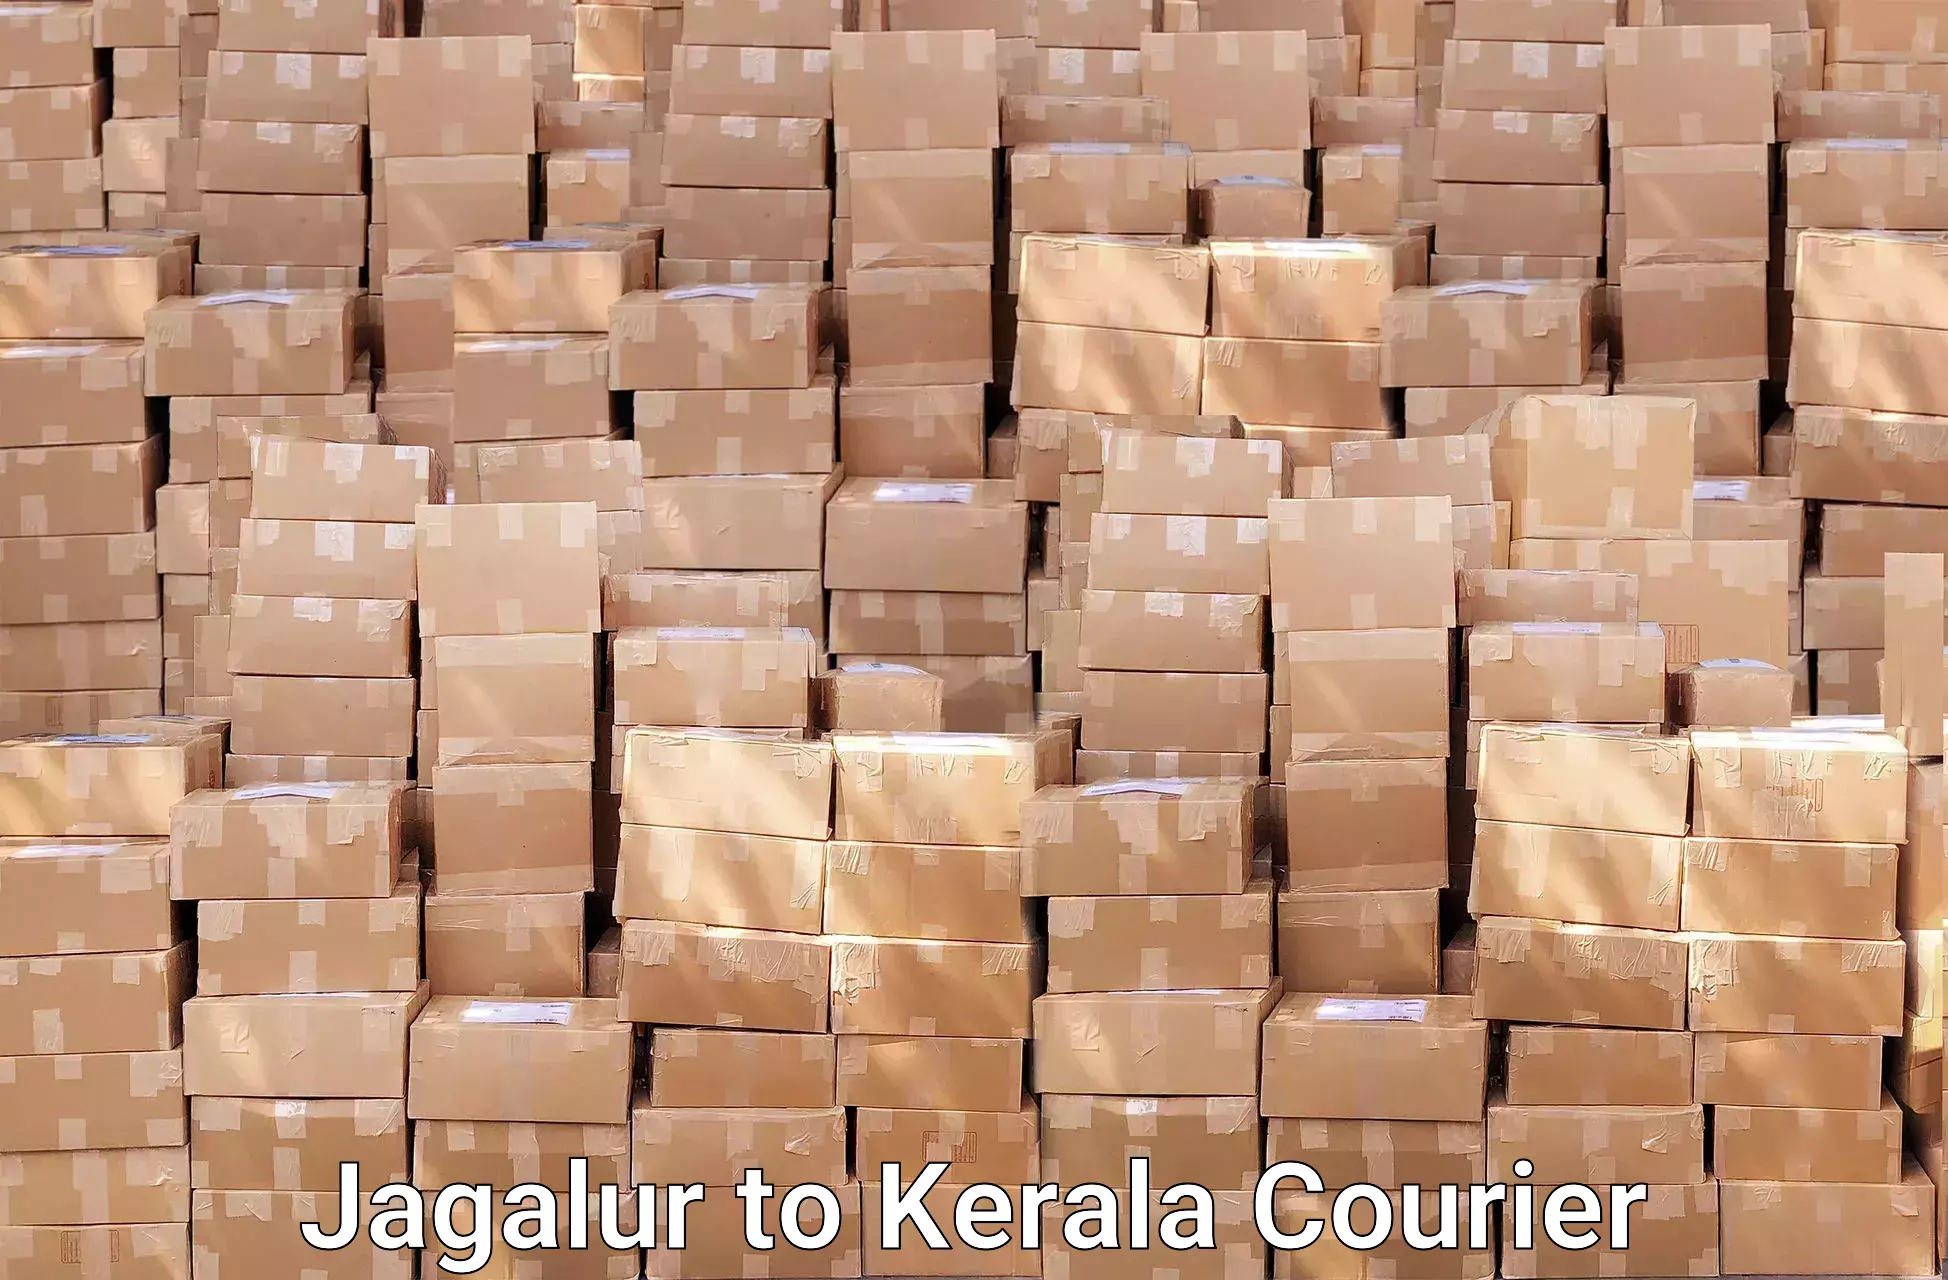 Moving and storage services Jagalur to Kochi